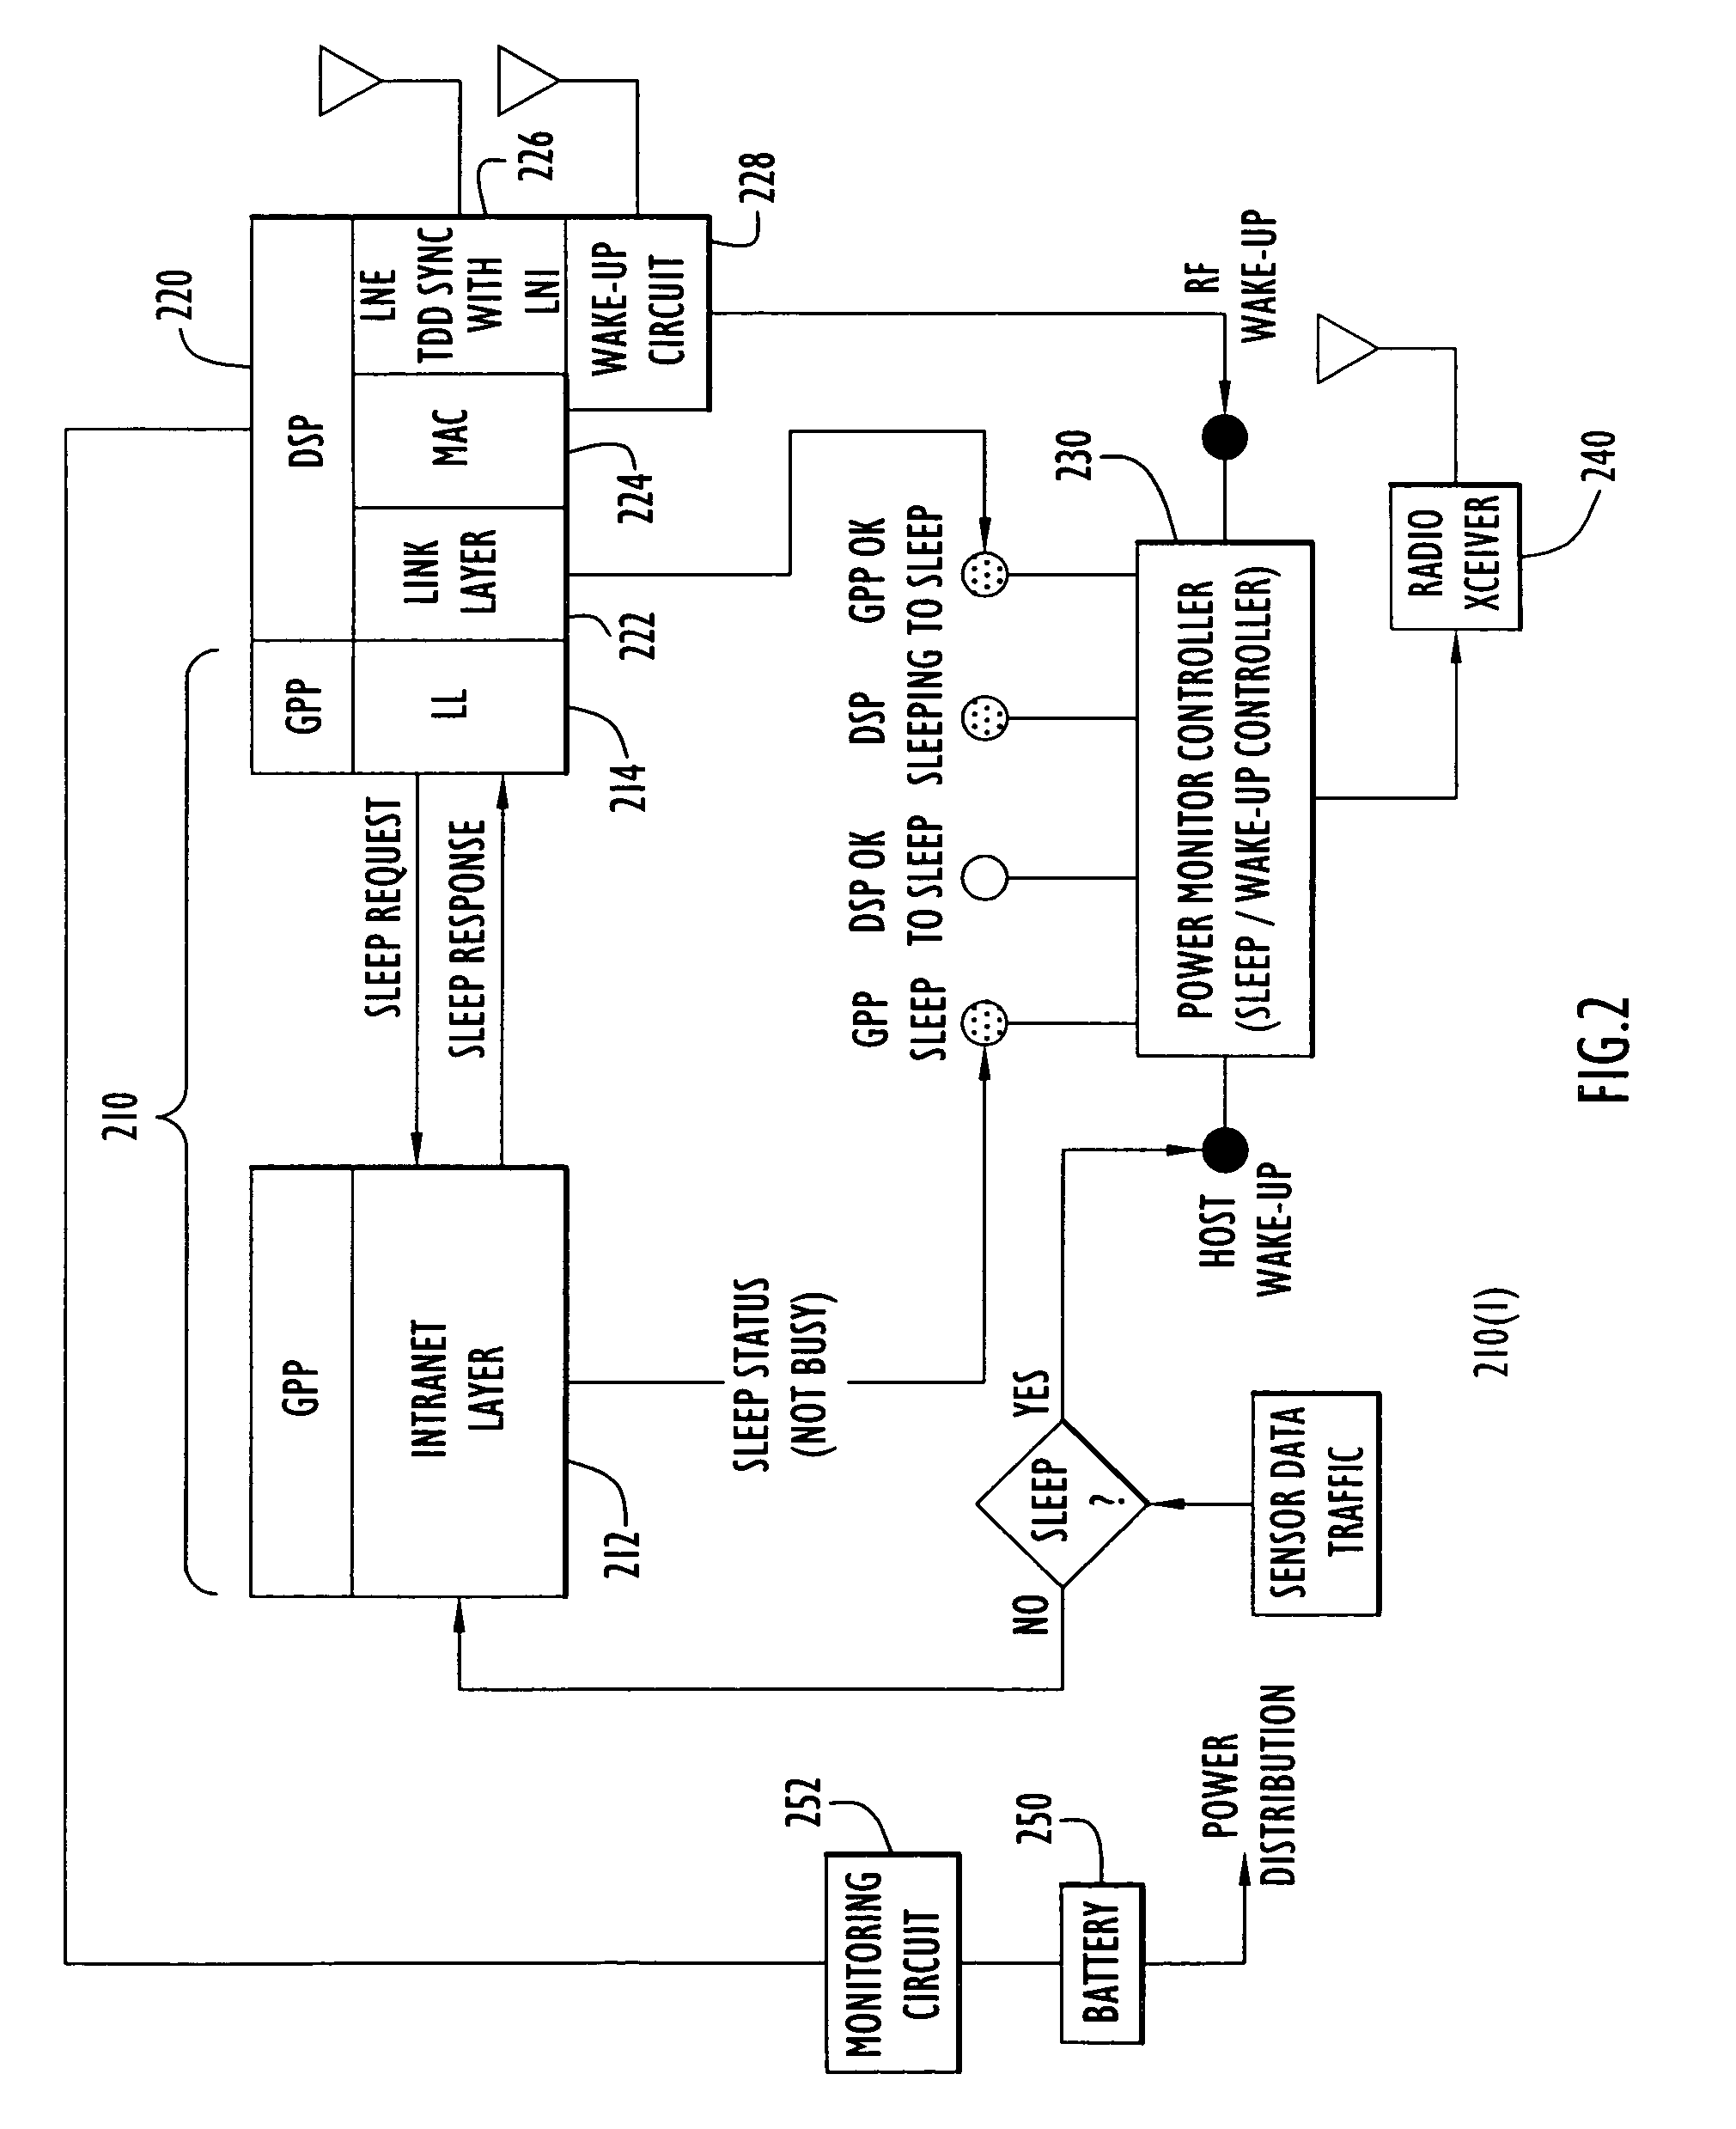 Energy-efficient network protocol and node device for sensor networks